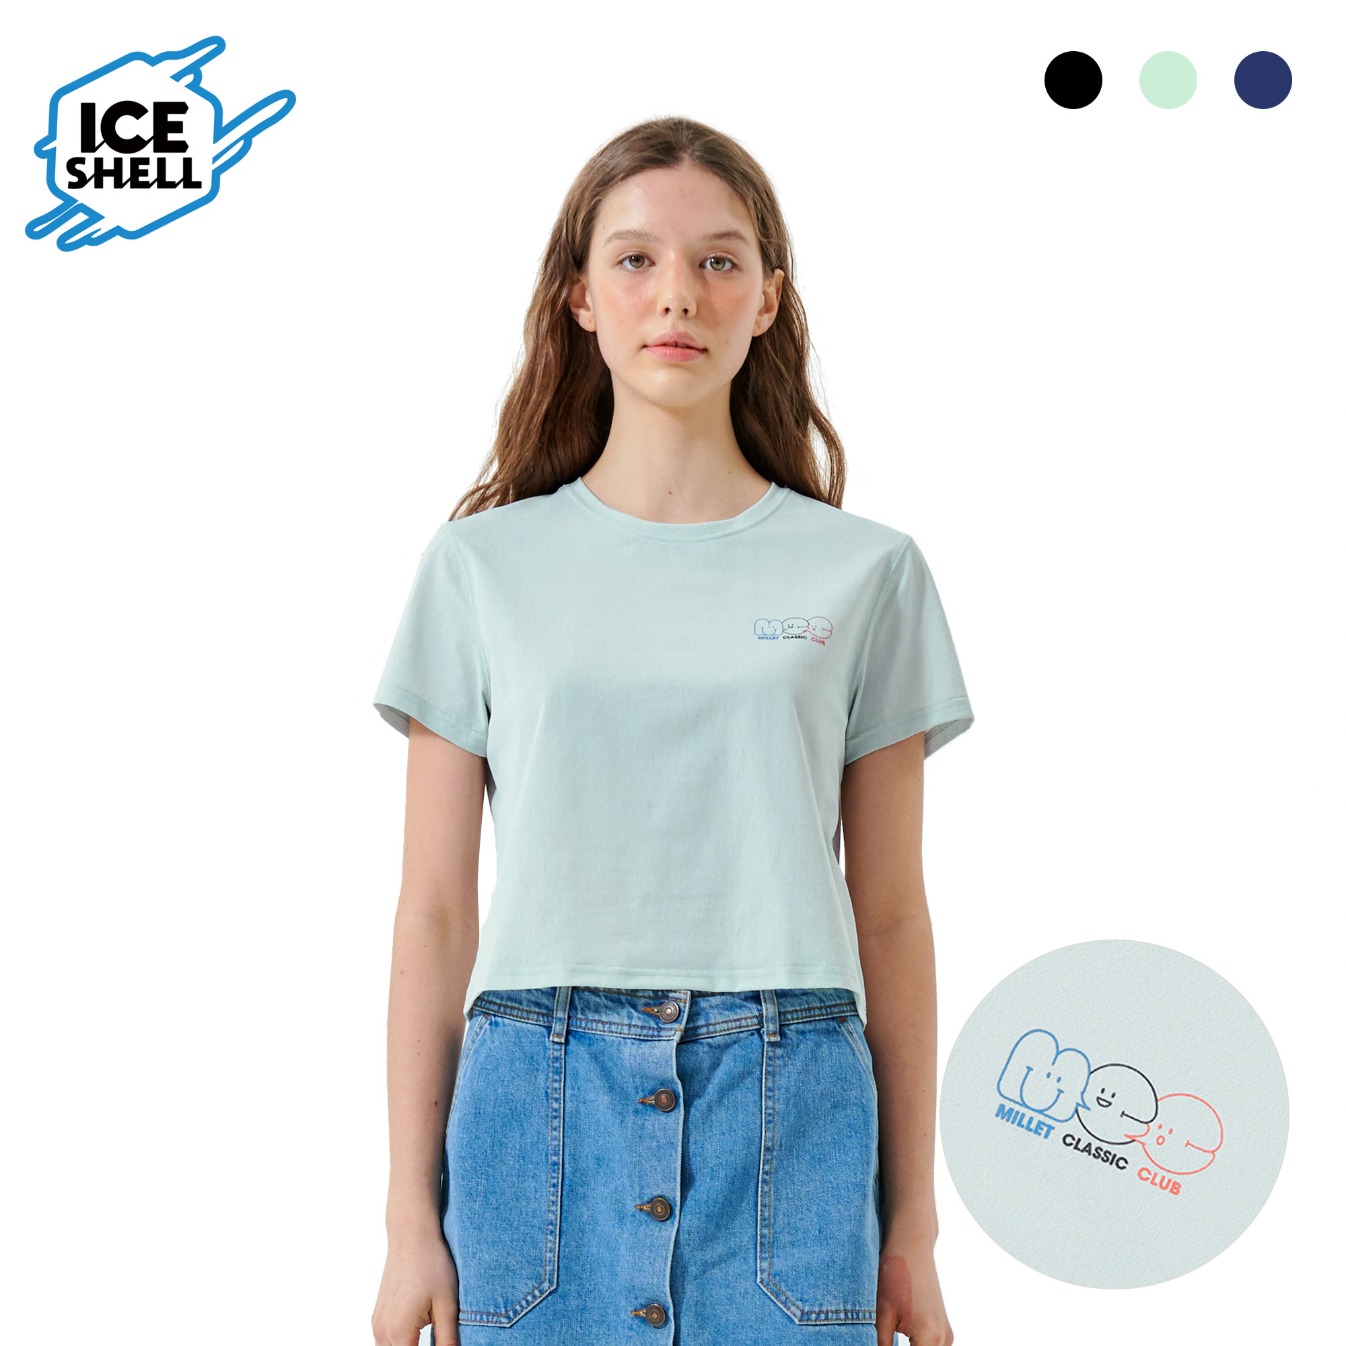 MCC GRAPHIC ICE SHELL CROP T-SHIRTS